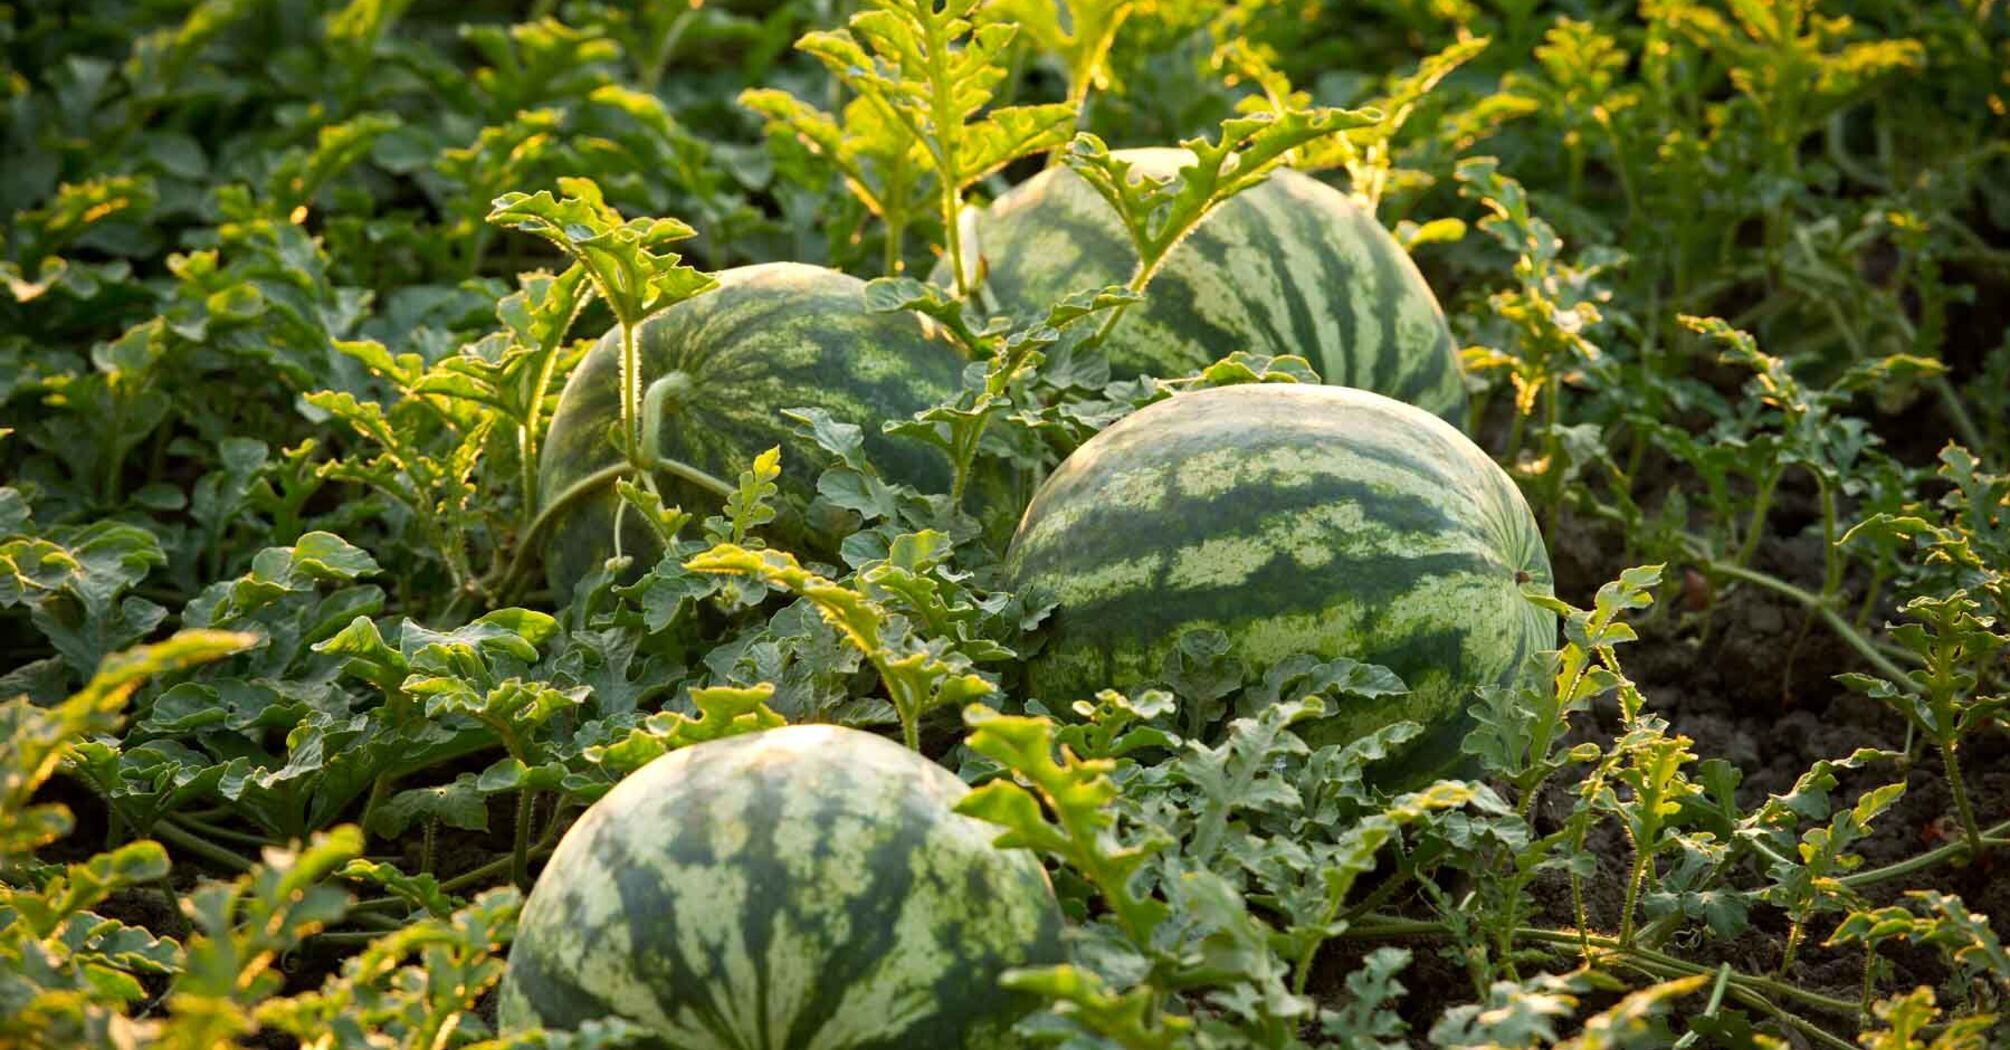 When and how to plant watermelons and melons for seedlings